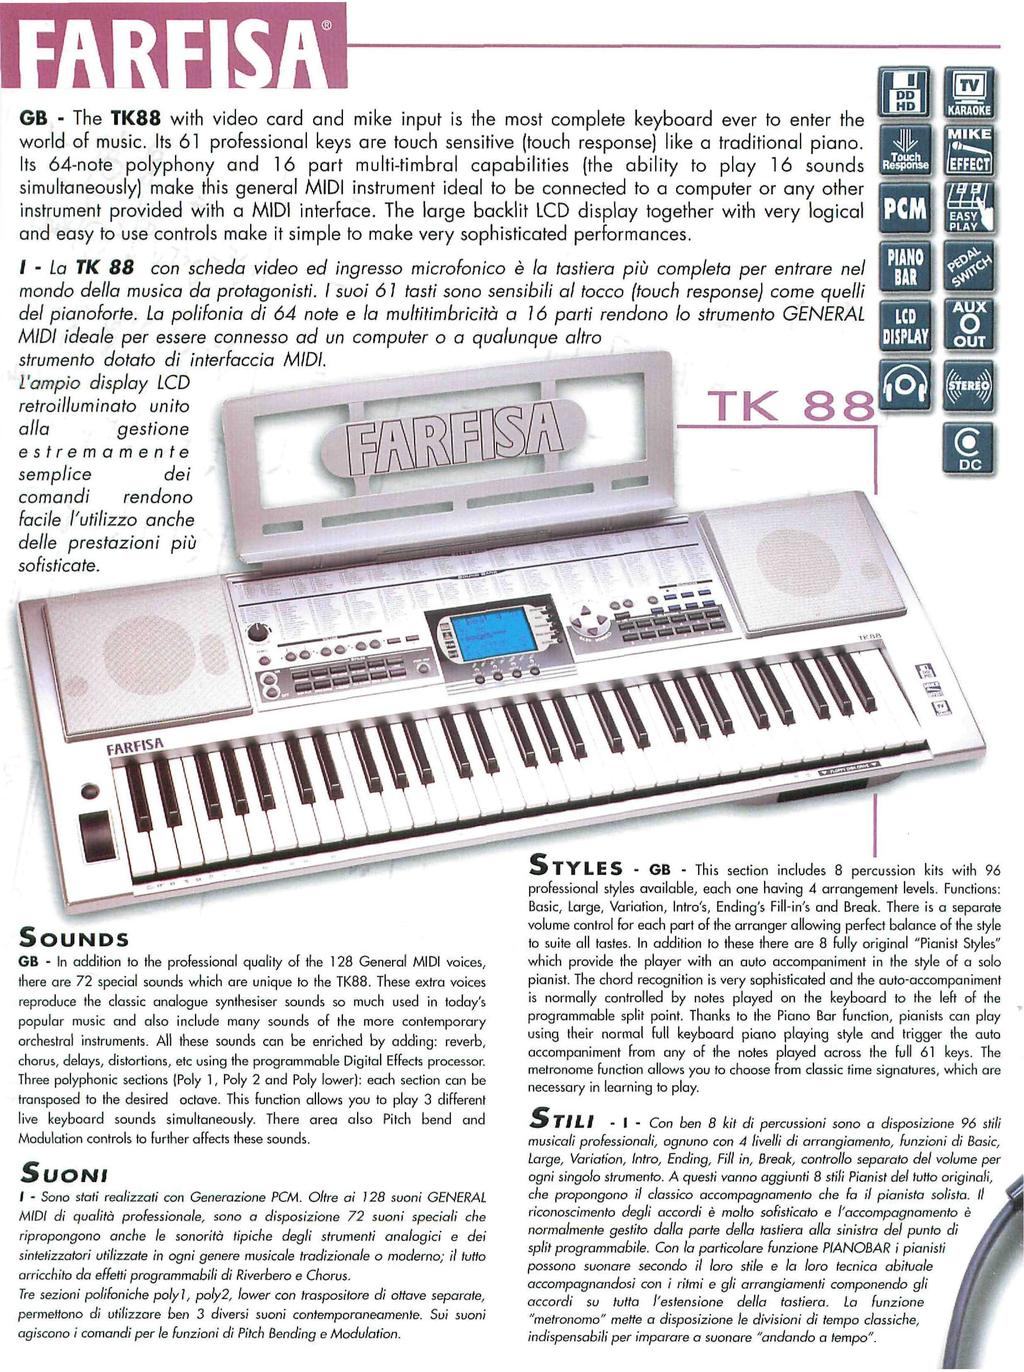 IM7B1 GB - The TK88 with video card and mike input is the most complete keyboard ever to enter the world of music.